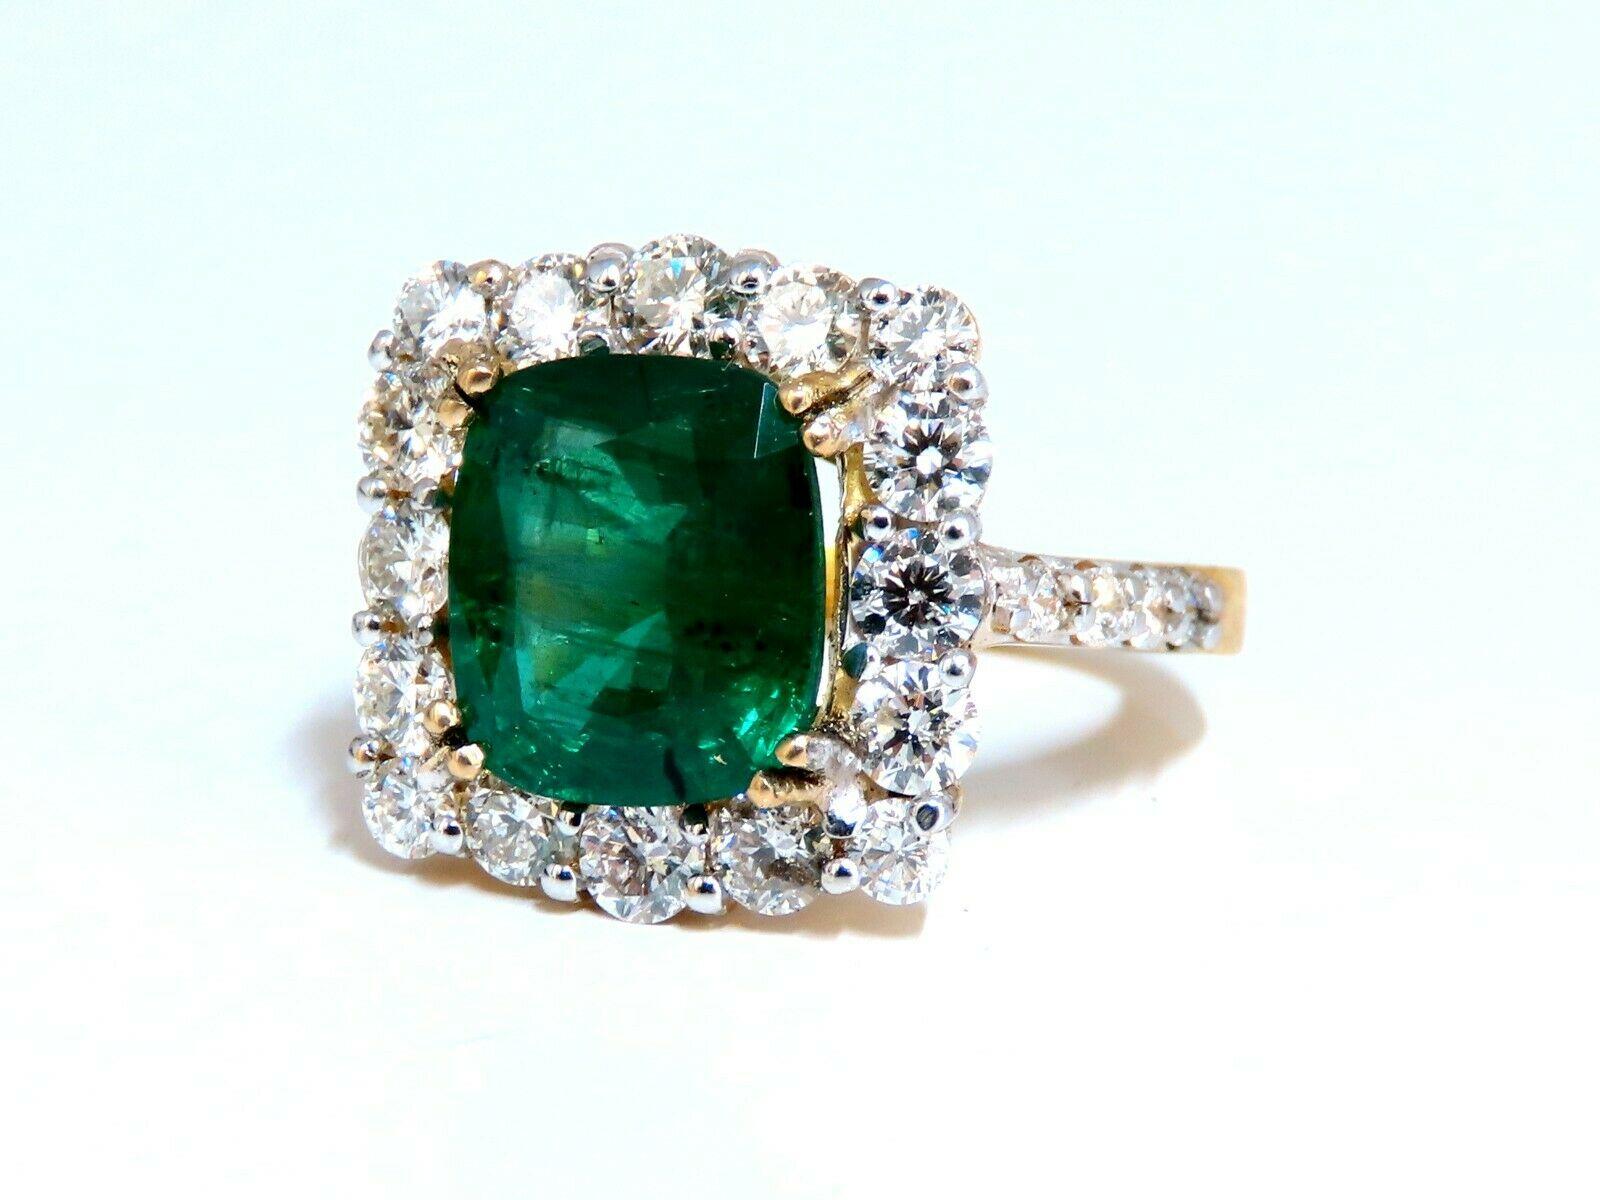 Squared Halo Cluster Green.

3.80ct. Natural Emerald Ring

Emerald, Brilliant cut

10.7 x 8.9mm Diameter

Transparent & Vivid Green 

2.00ct. Diamonds.

Rounds & full cuts 

G-color Vs-2 clarity.  

14kt. yellow gold

8.2 grams

Ring Current size: